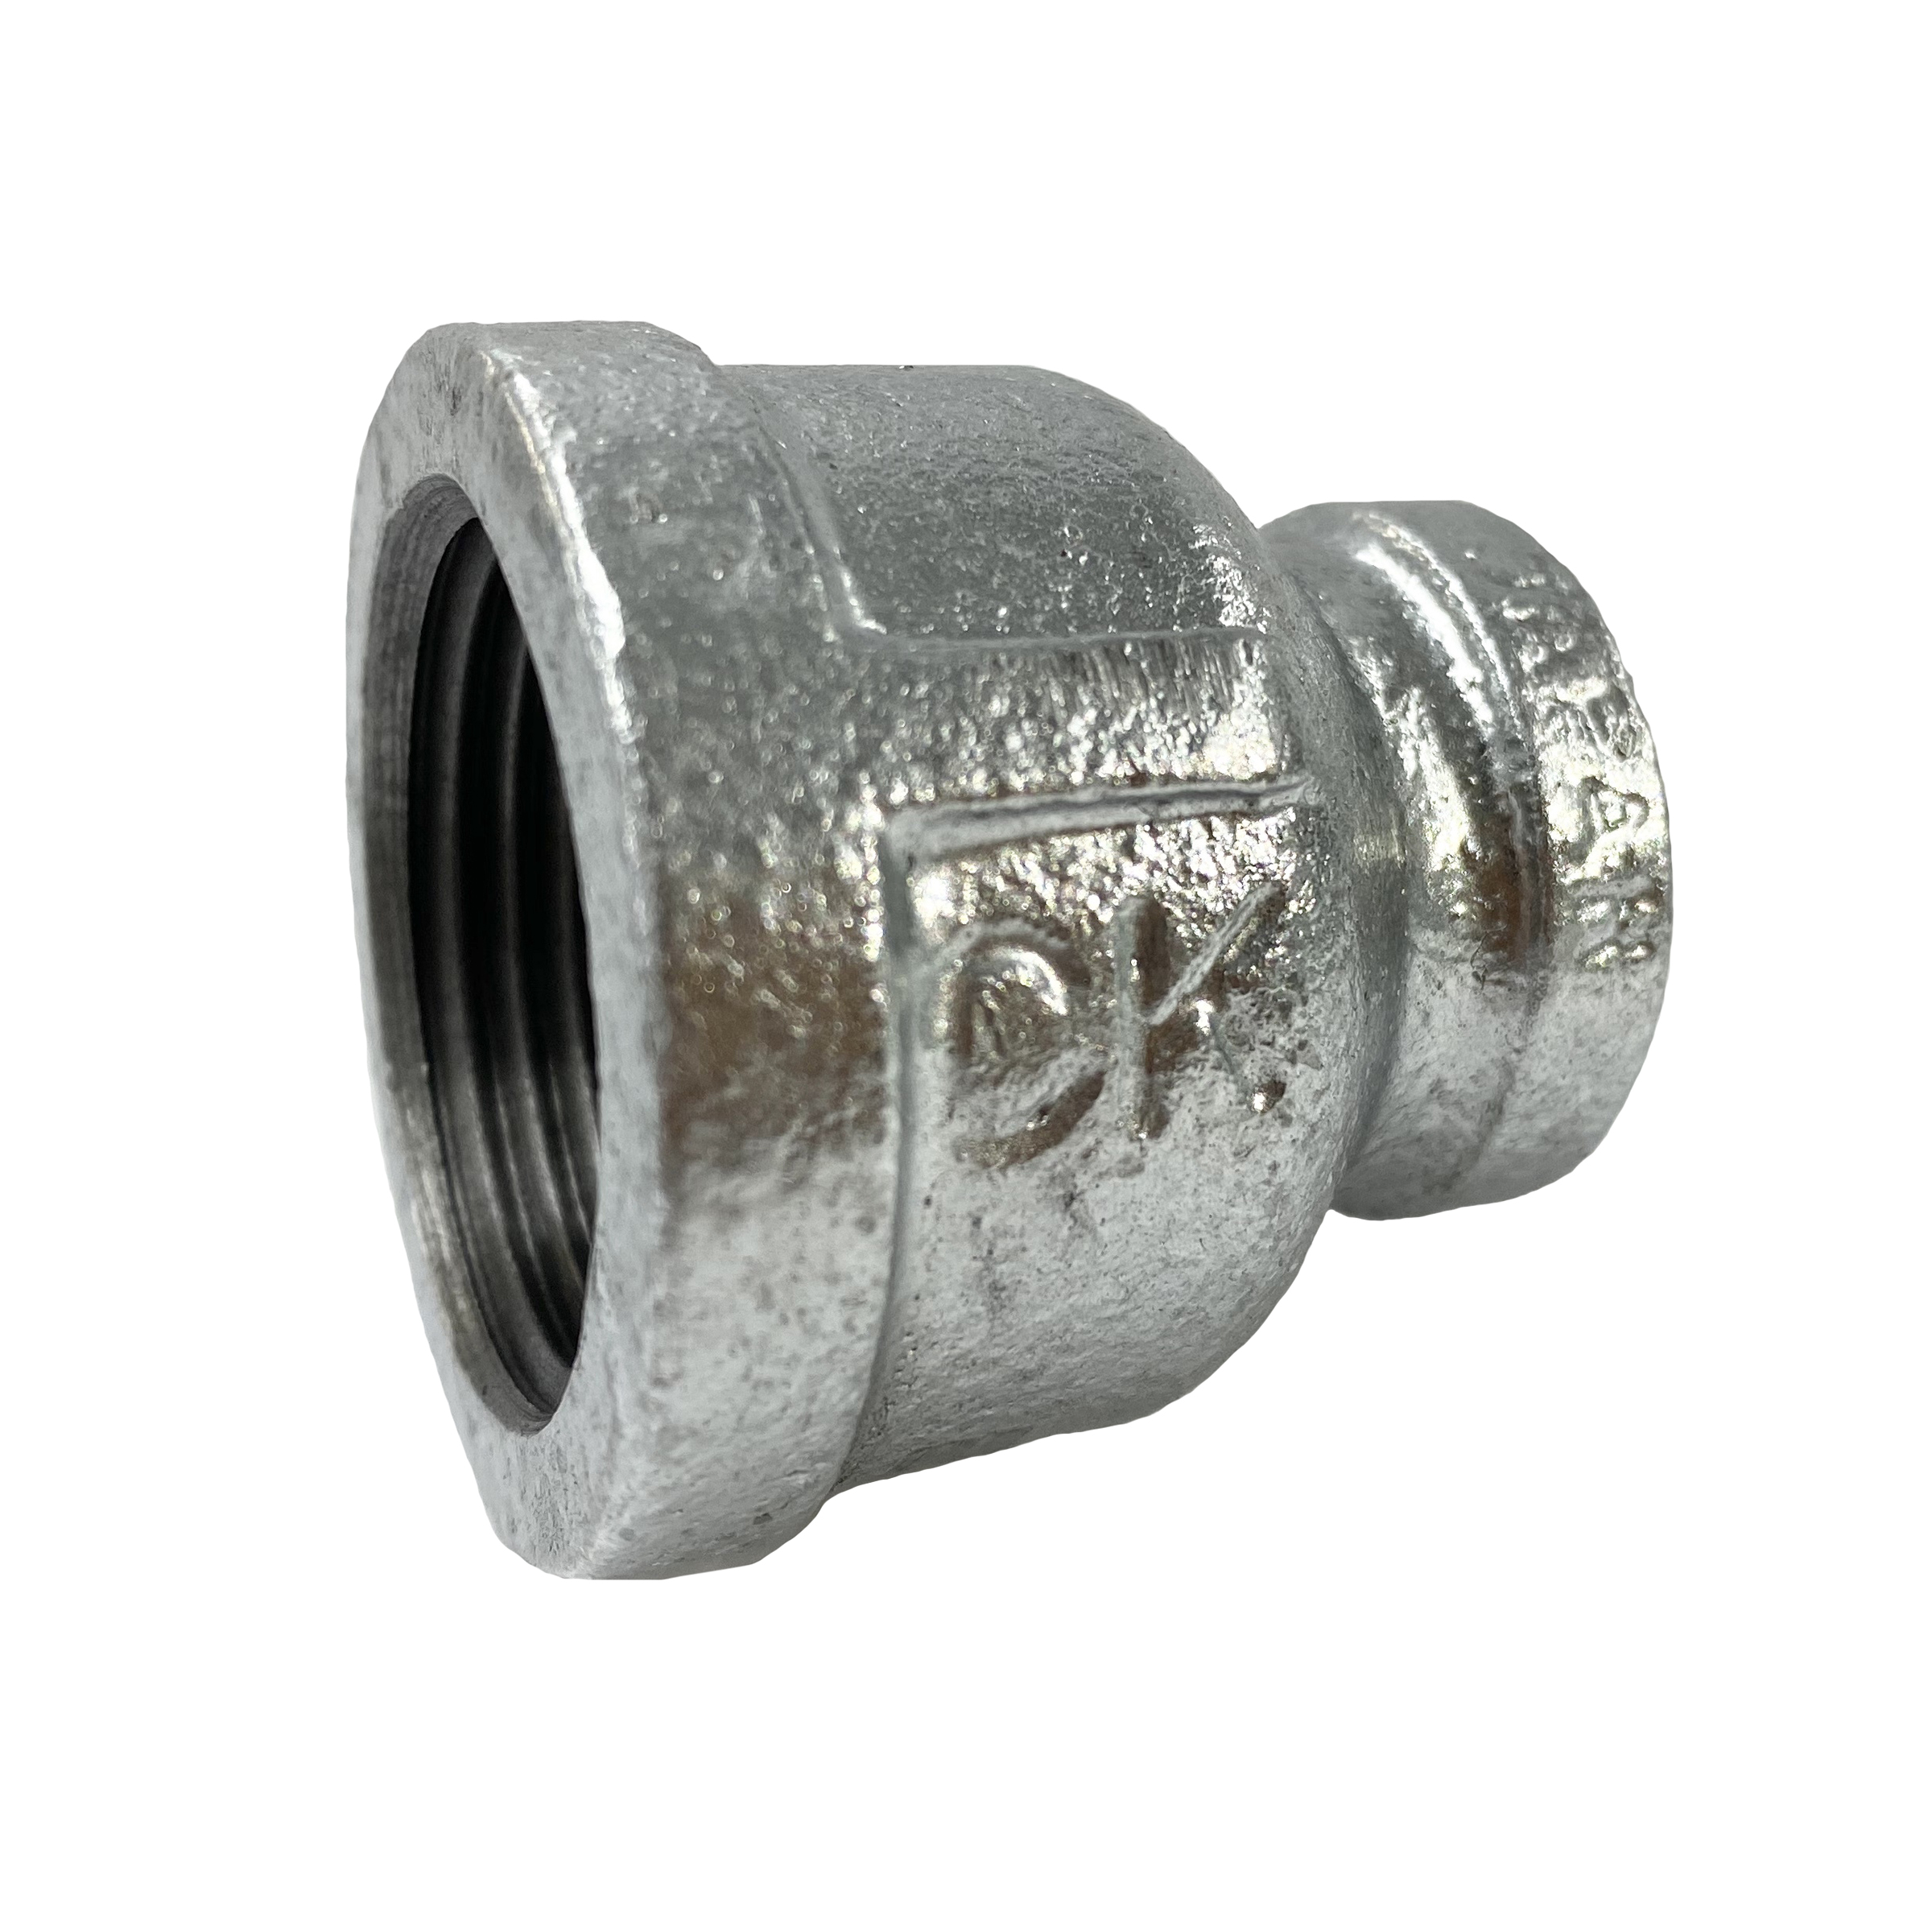 CK Fittings - Screw-in Type Malleable Cast Iron Pipe Fitting - Socket with Different Diameters with Band (BRS-25X20-W) 